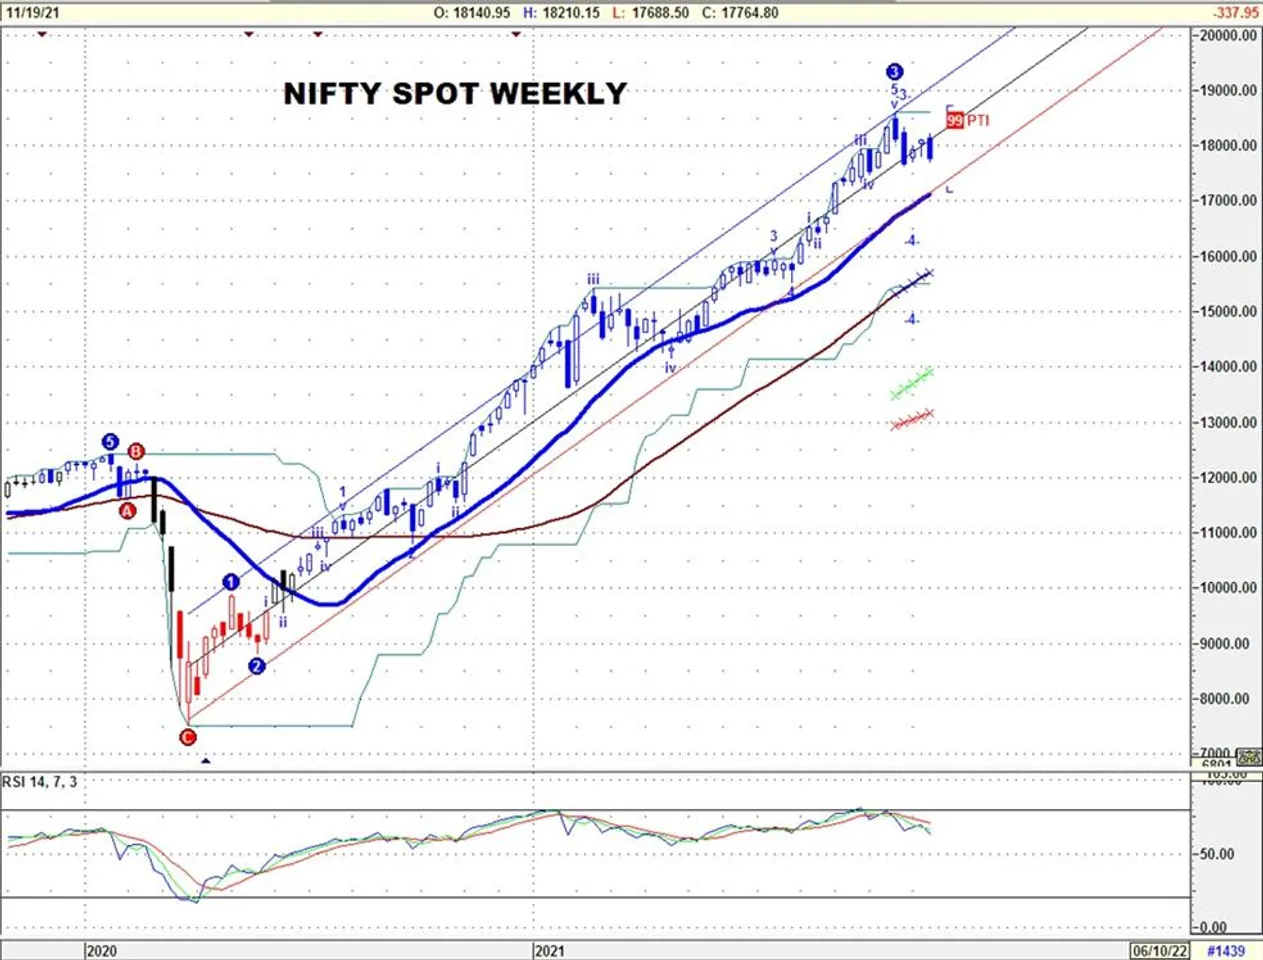 WEEKLY TECH View of Bank Nifty Spot:-